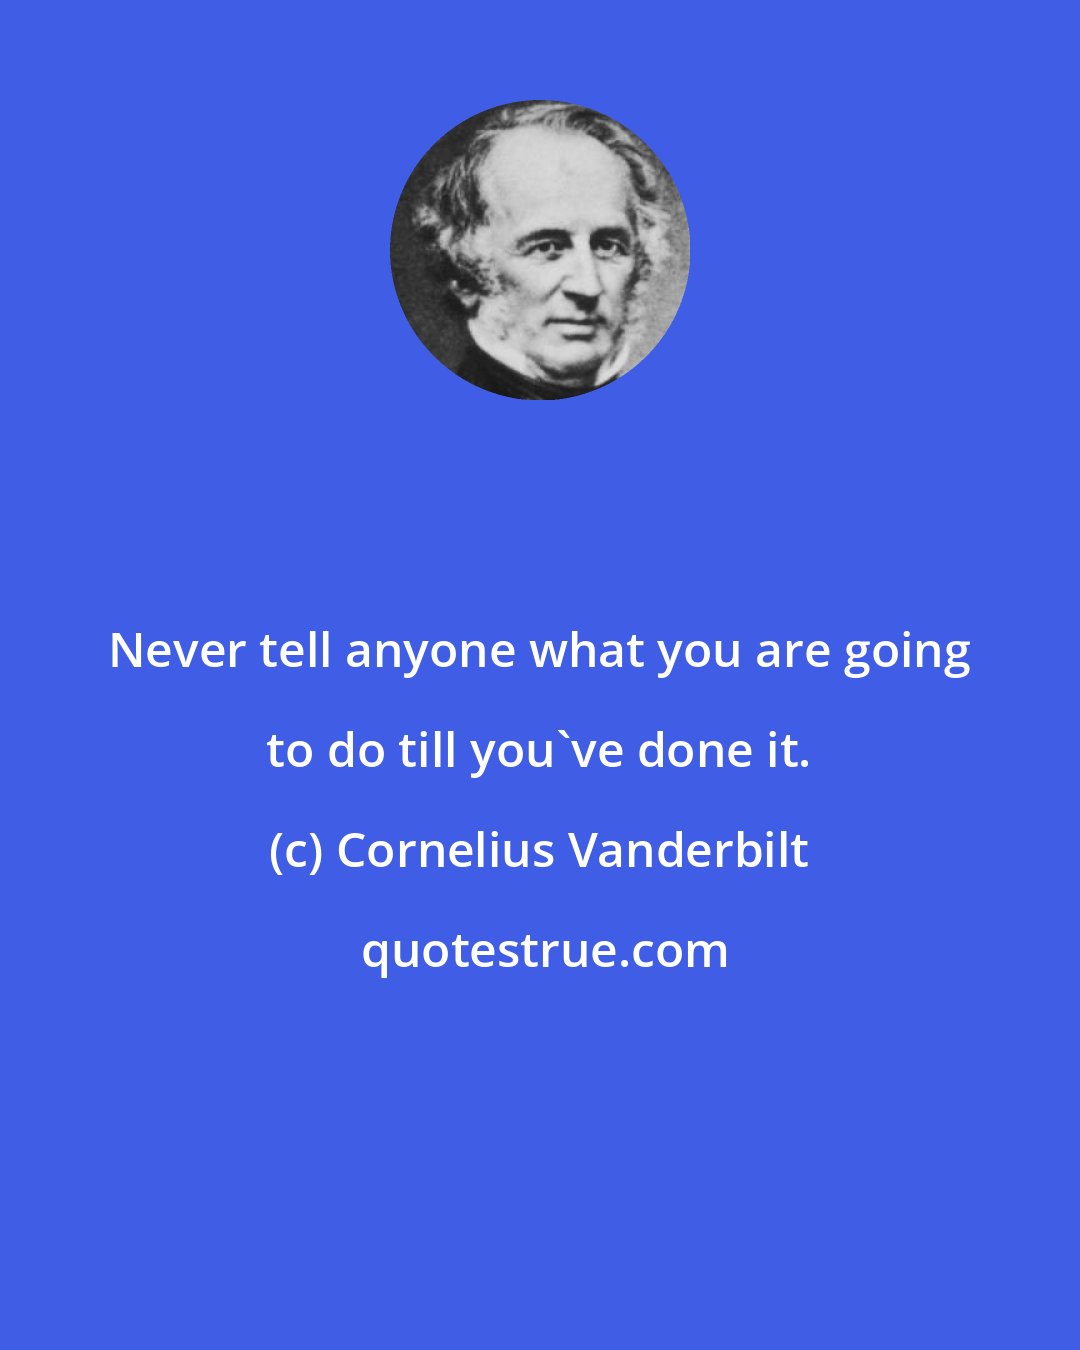 Cornelius Vanderbilt: Never tell anyone what you are going to do till you've done it.